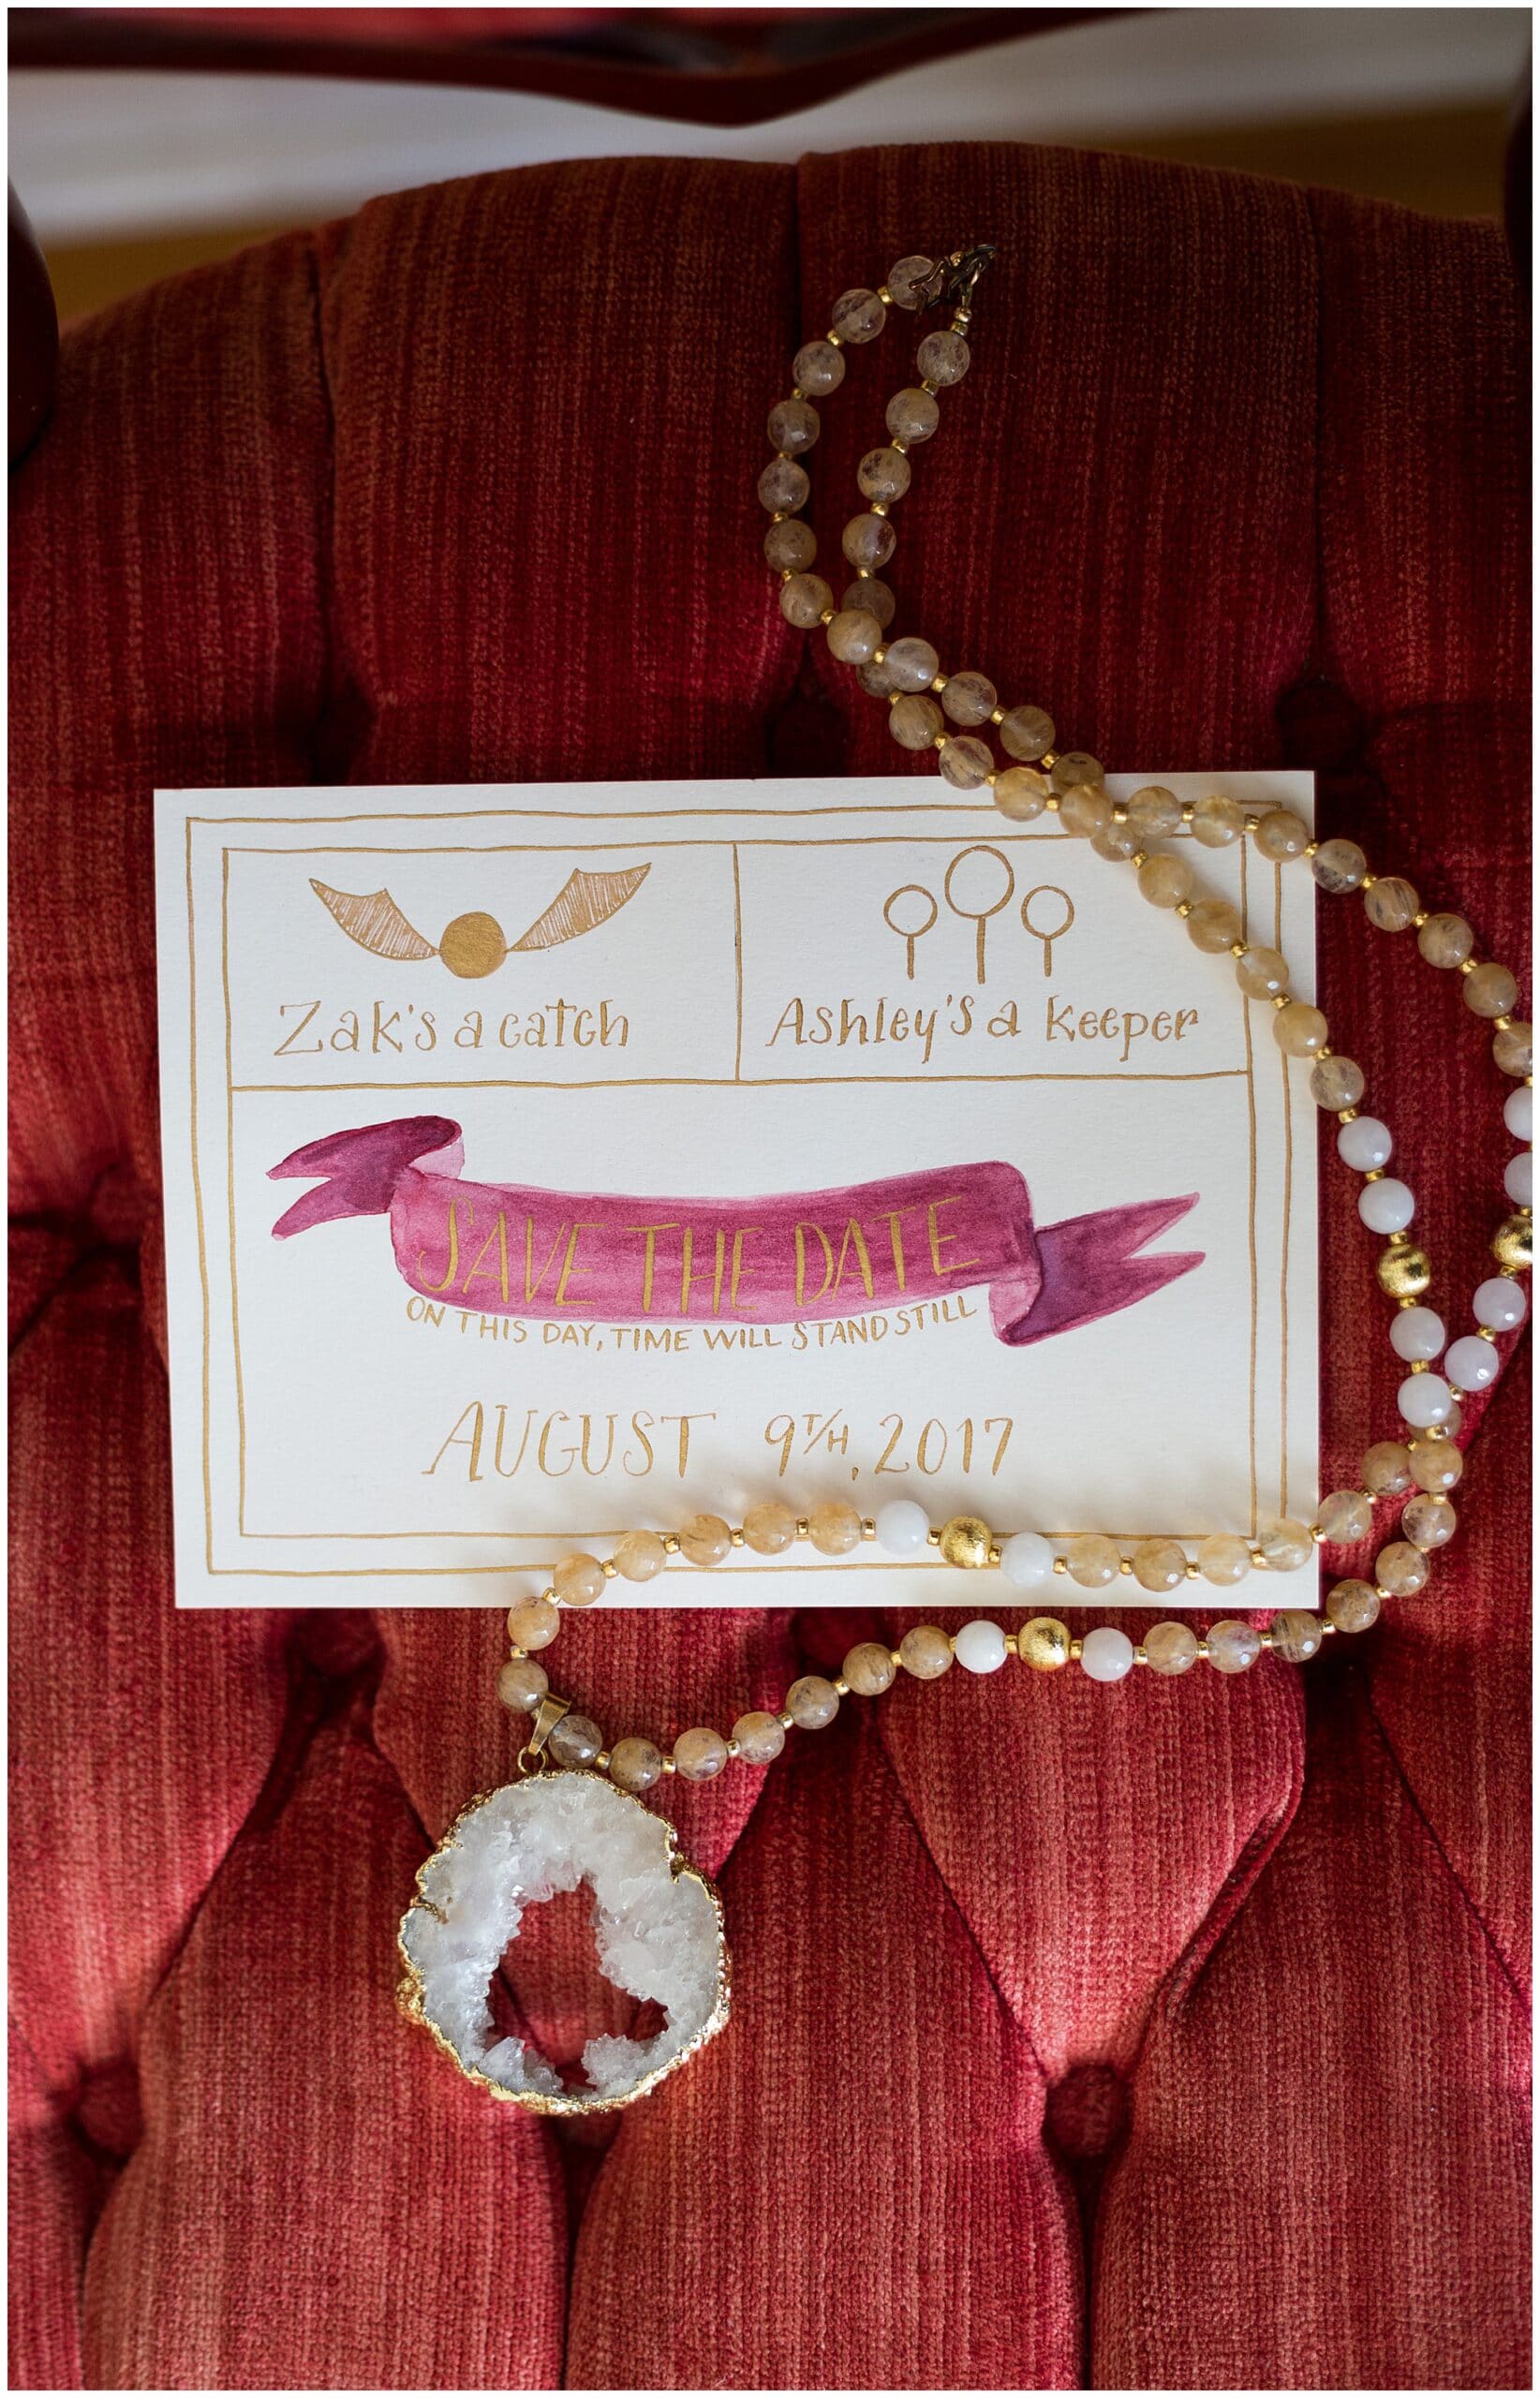 Harry Potter save the date invitations to the Grand Texana in Houston Texas photographed by Swish and Click Photography